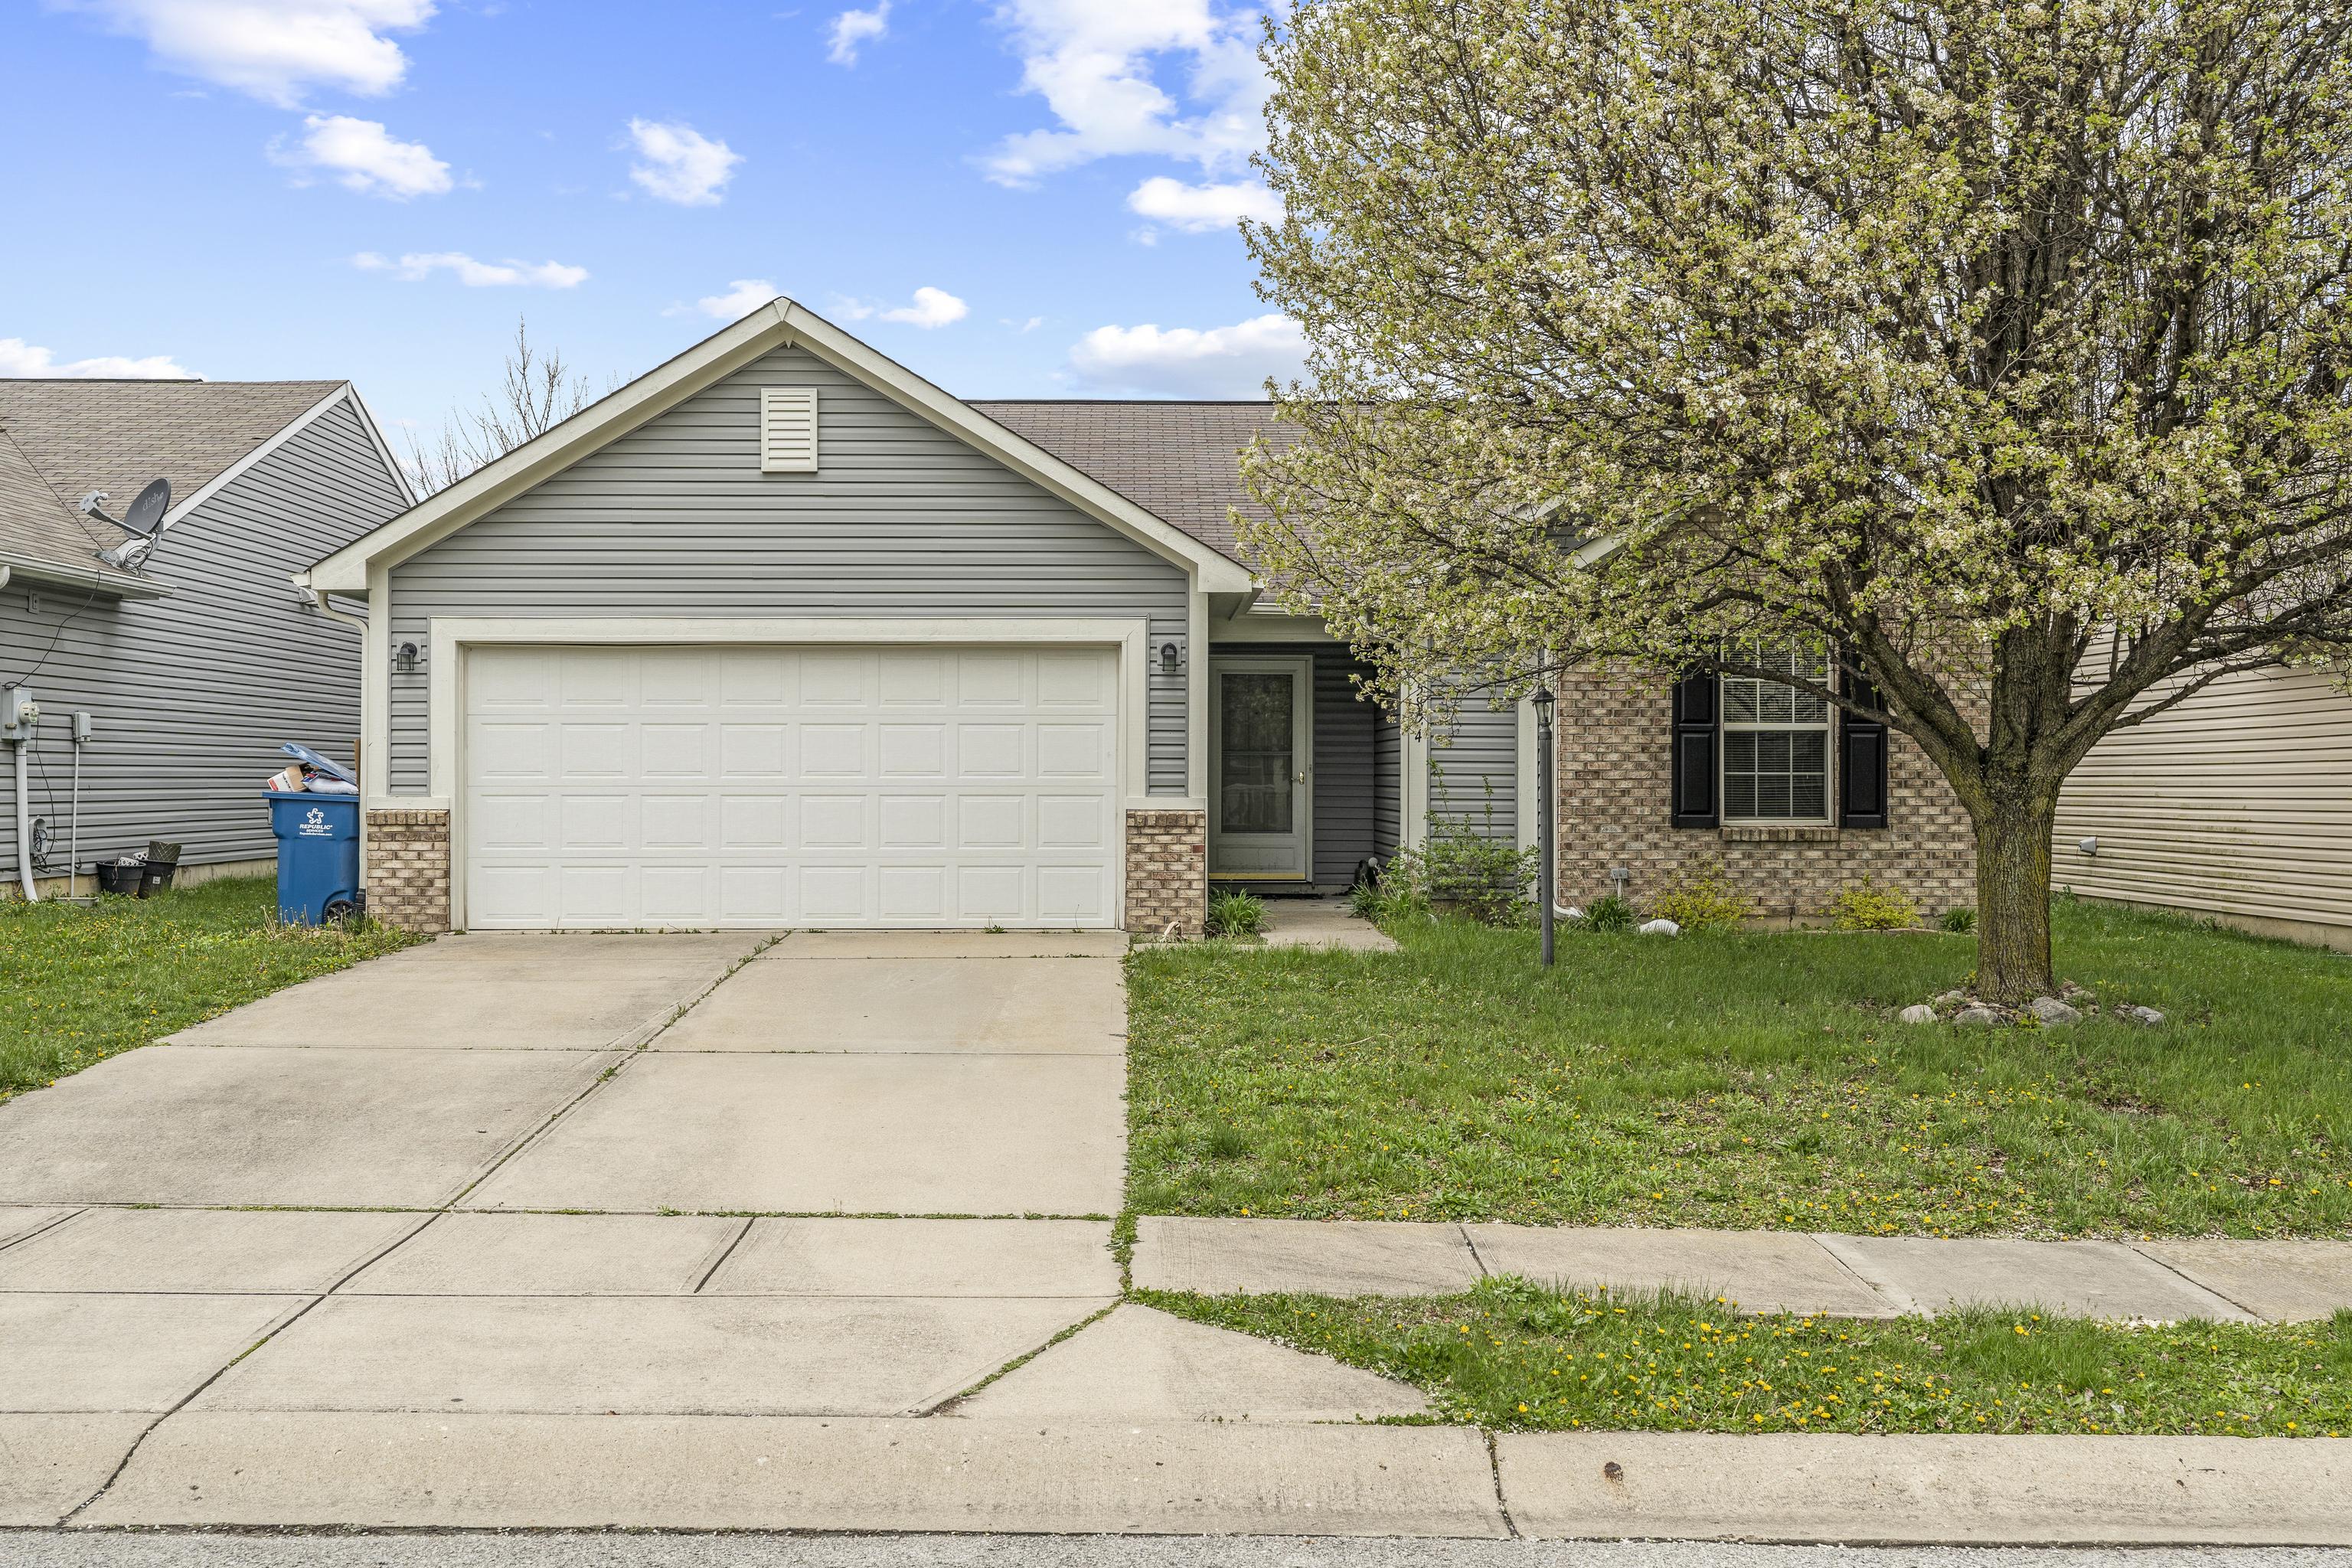 Photo one of 5824 Sable Dr Indianapolis IN 46221 | MLS 21974057